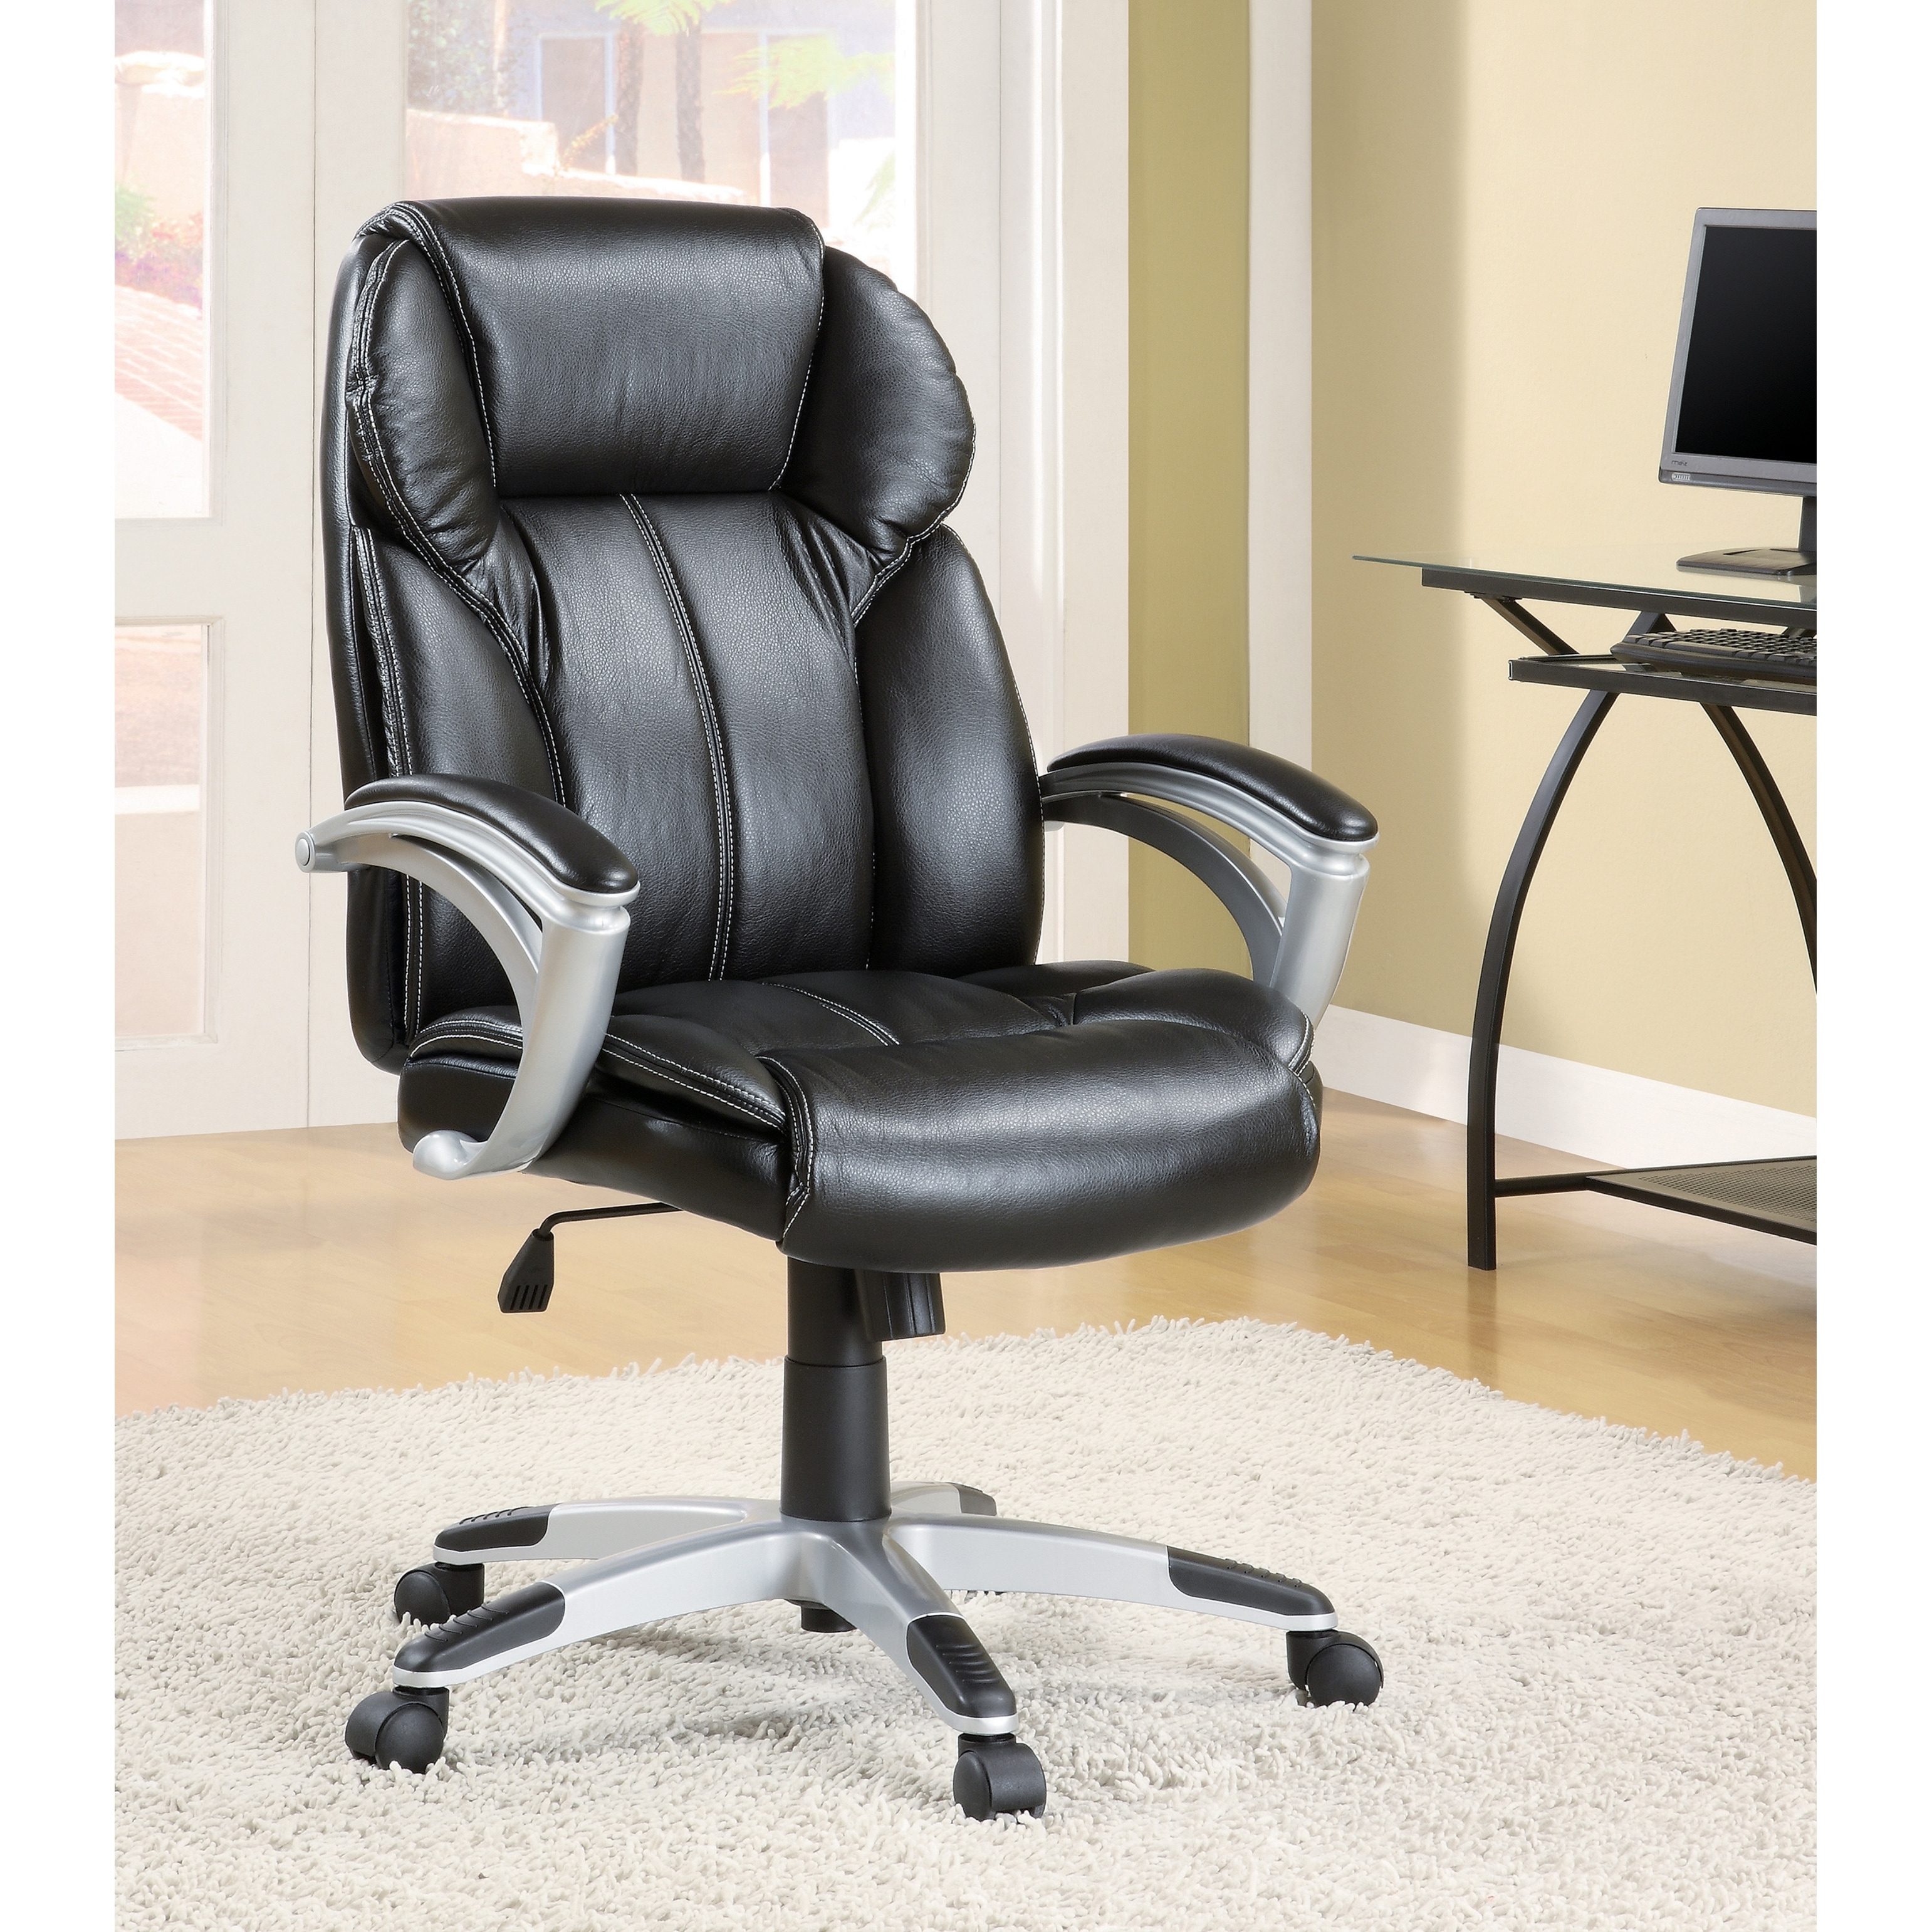 https://ak1.ostkcdn.com/images/products/is/images/direct/6619e0442db6563821a8ee1672dec722e2c63920/Executive-Ergonomic-Plush-Adjustable-Office-Chair-with-Padded-Arms.jpg